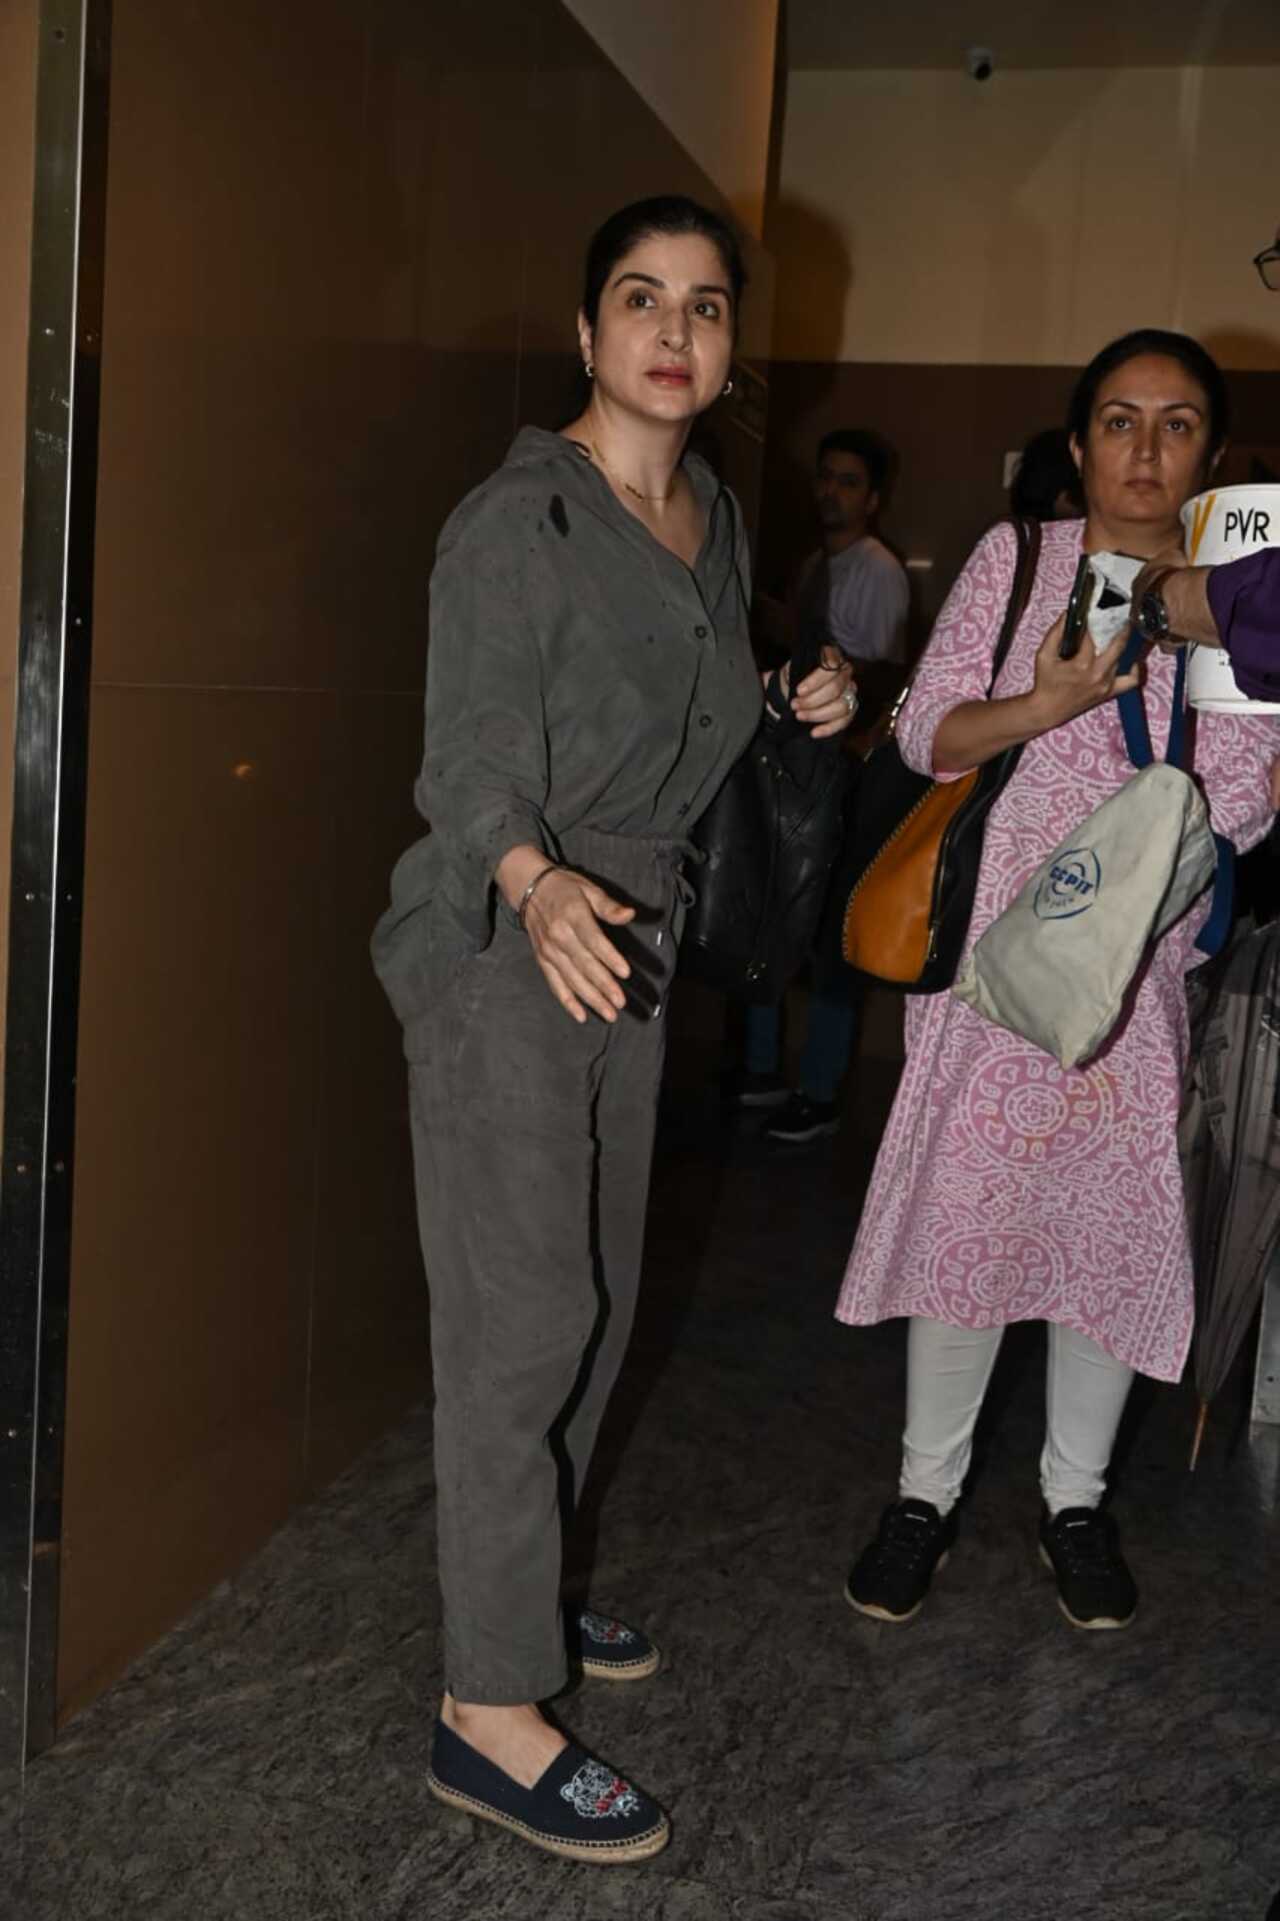 Maheep Kapoor opted for a casual outfit as she got snapped at Juhu PVR